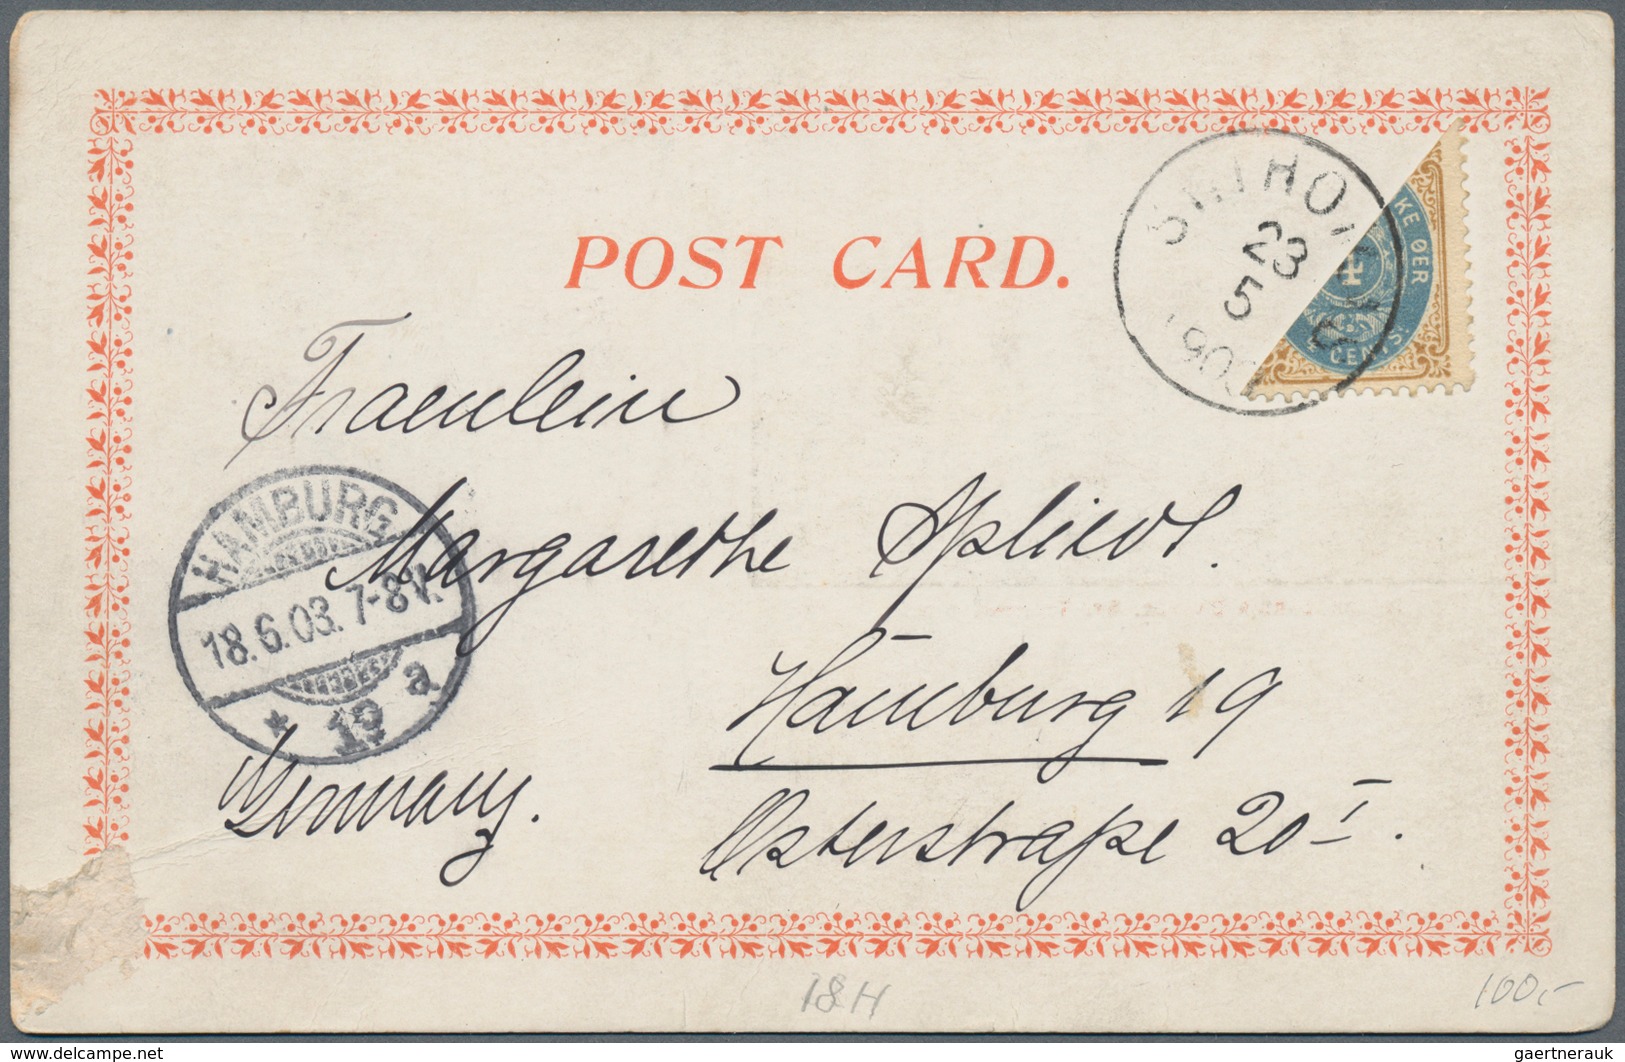 Dänemark: 1840's-1940's (ca.): More than 60 covers, postcards, postal stationery items and picture p